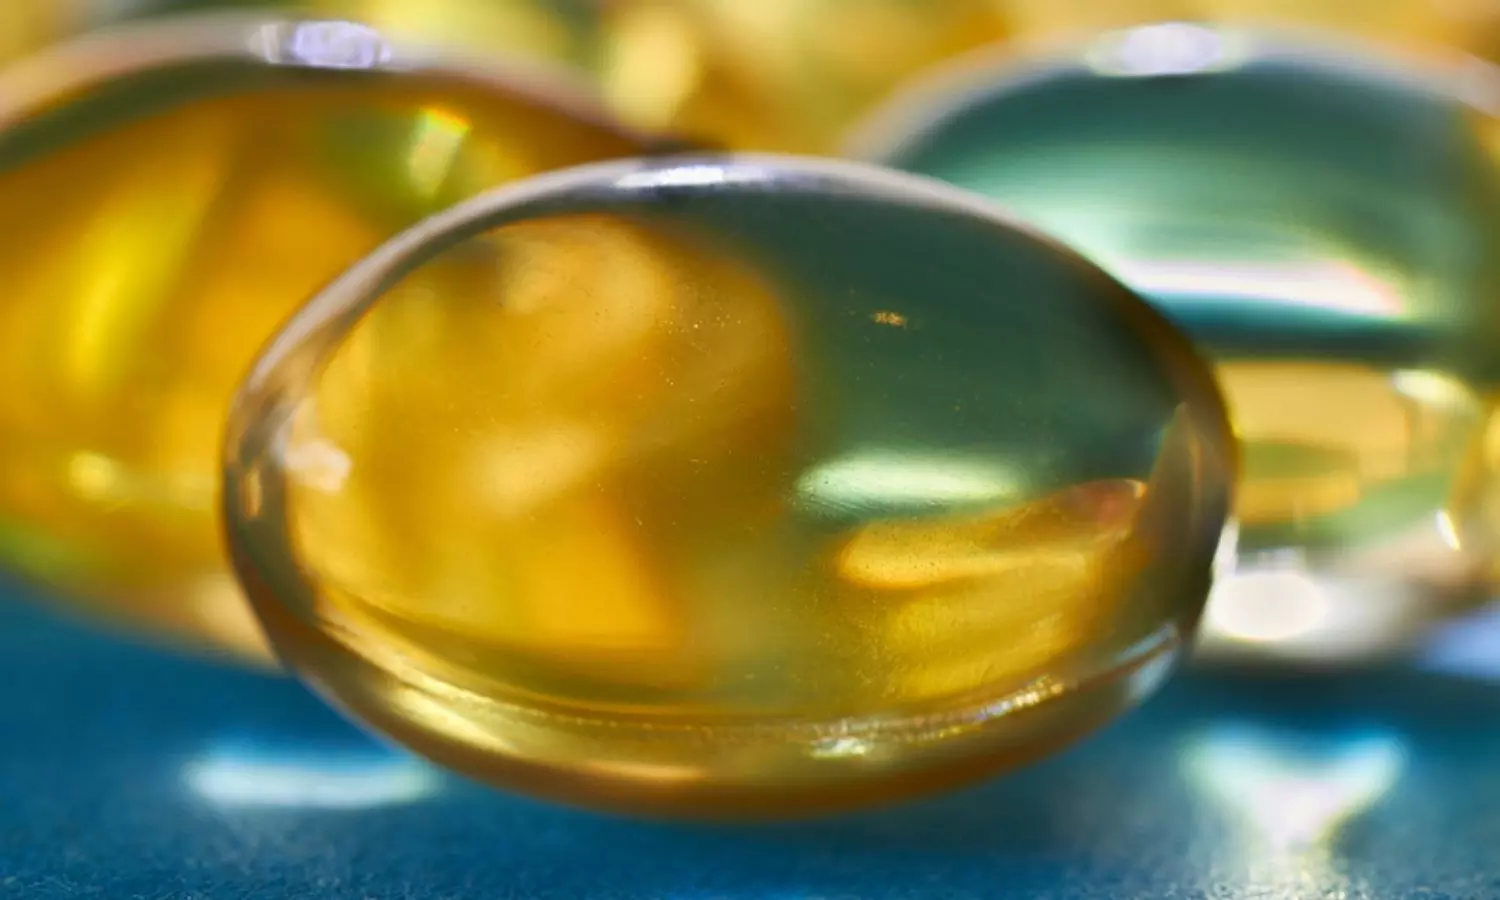 Vitamin D and fish oil supplements may reduce risk of autoimmune disease, trial finds